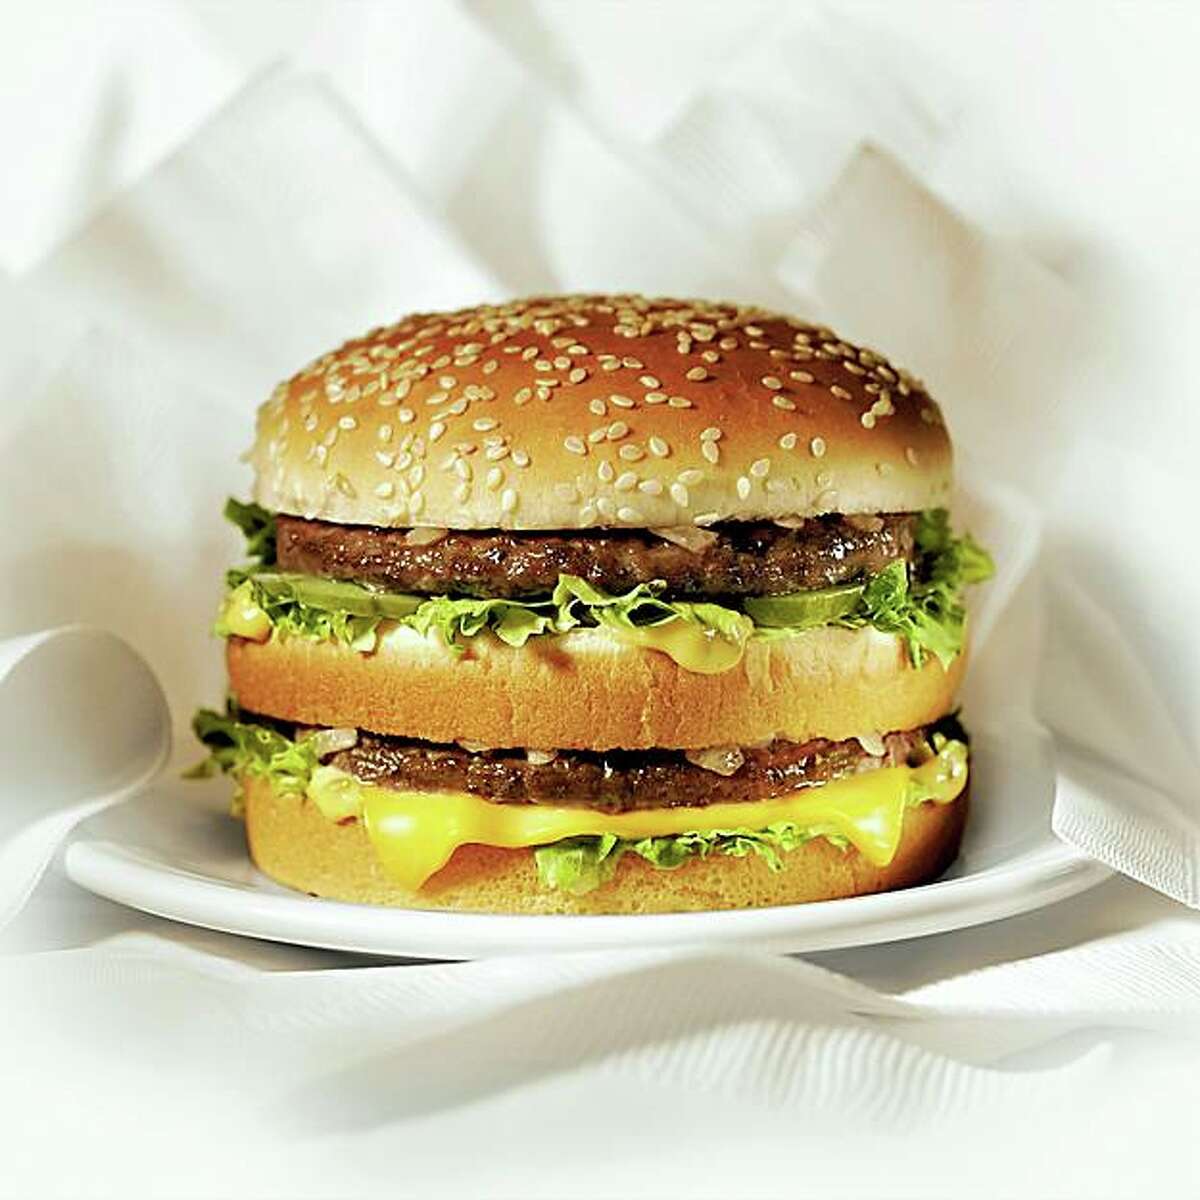 A San Francisco Board of Supervisors committee approved regulations requiring chain restaurants in the city to post on menus nutritional information such as total calories and fat content for standard food items. Under the new regulation, McDonald's would have to post the nutritional information for foods such as a Big Mac. Photo Courtesy of McDonald's Corporation